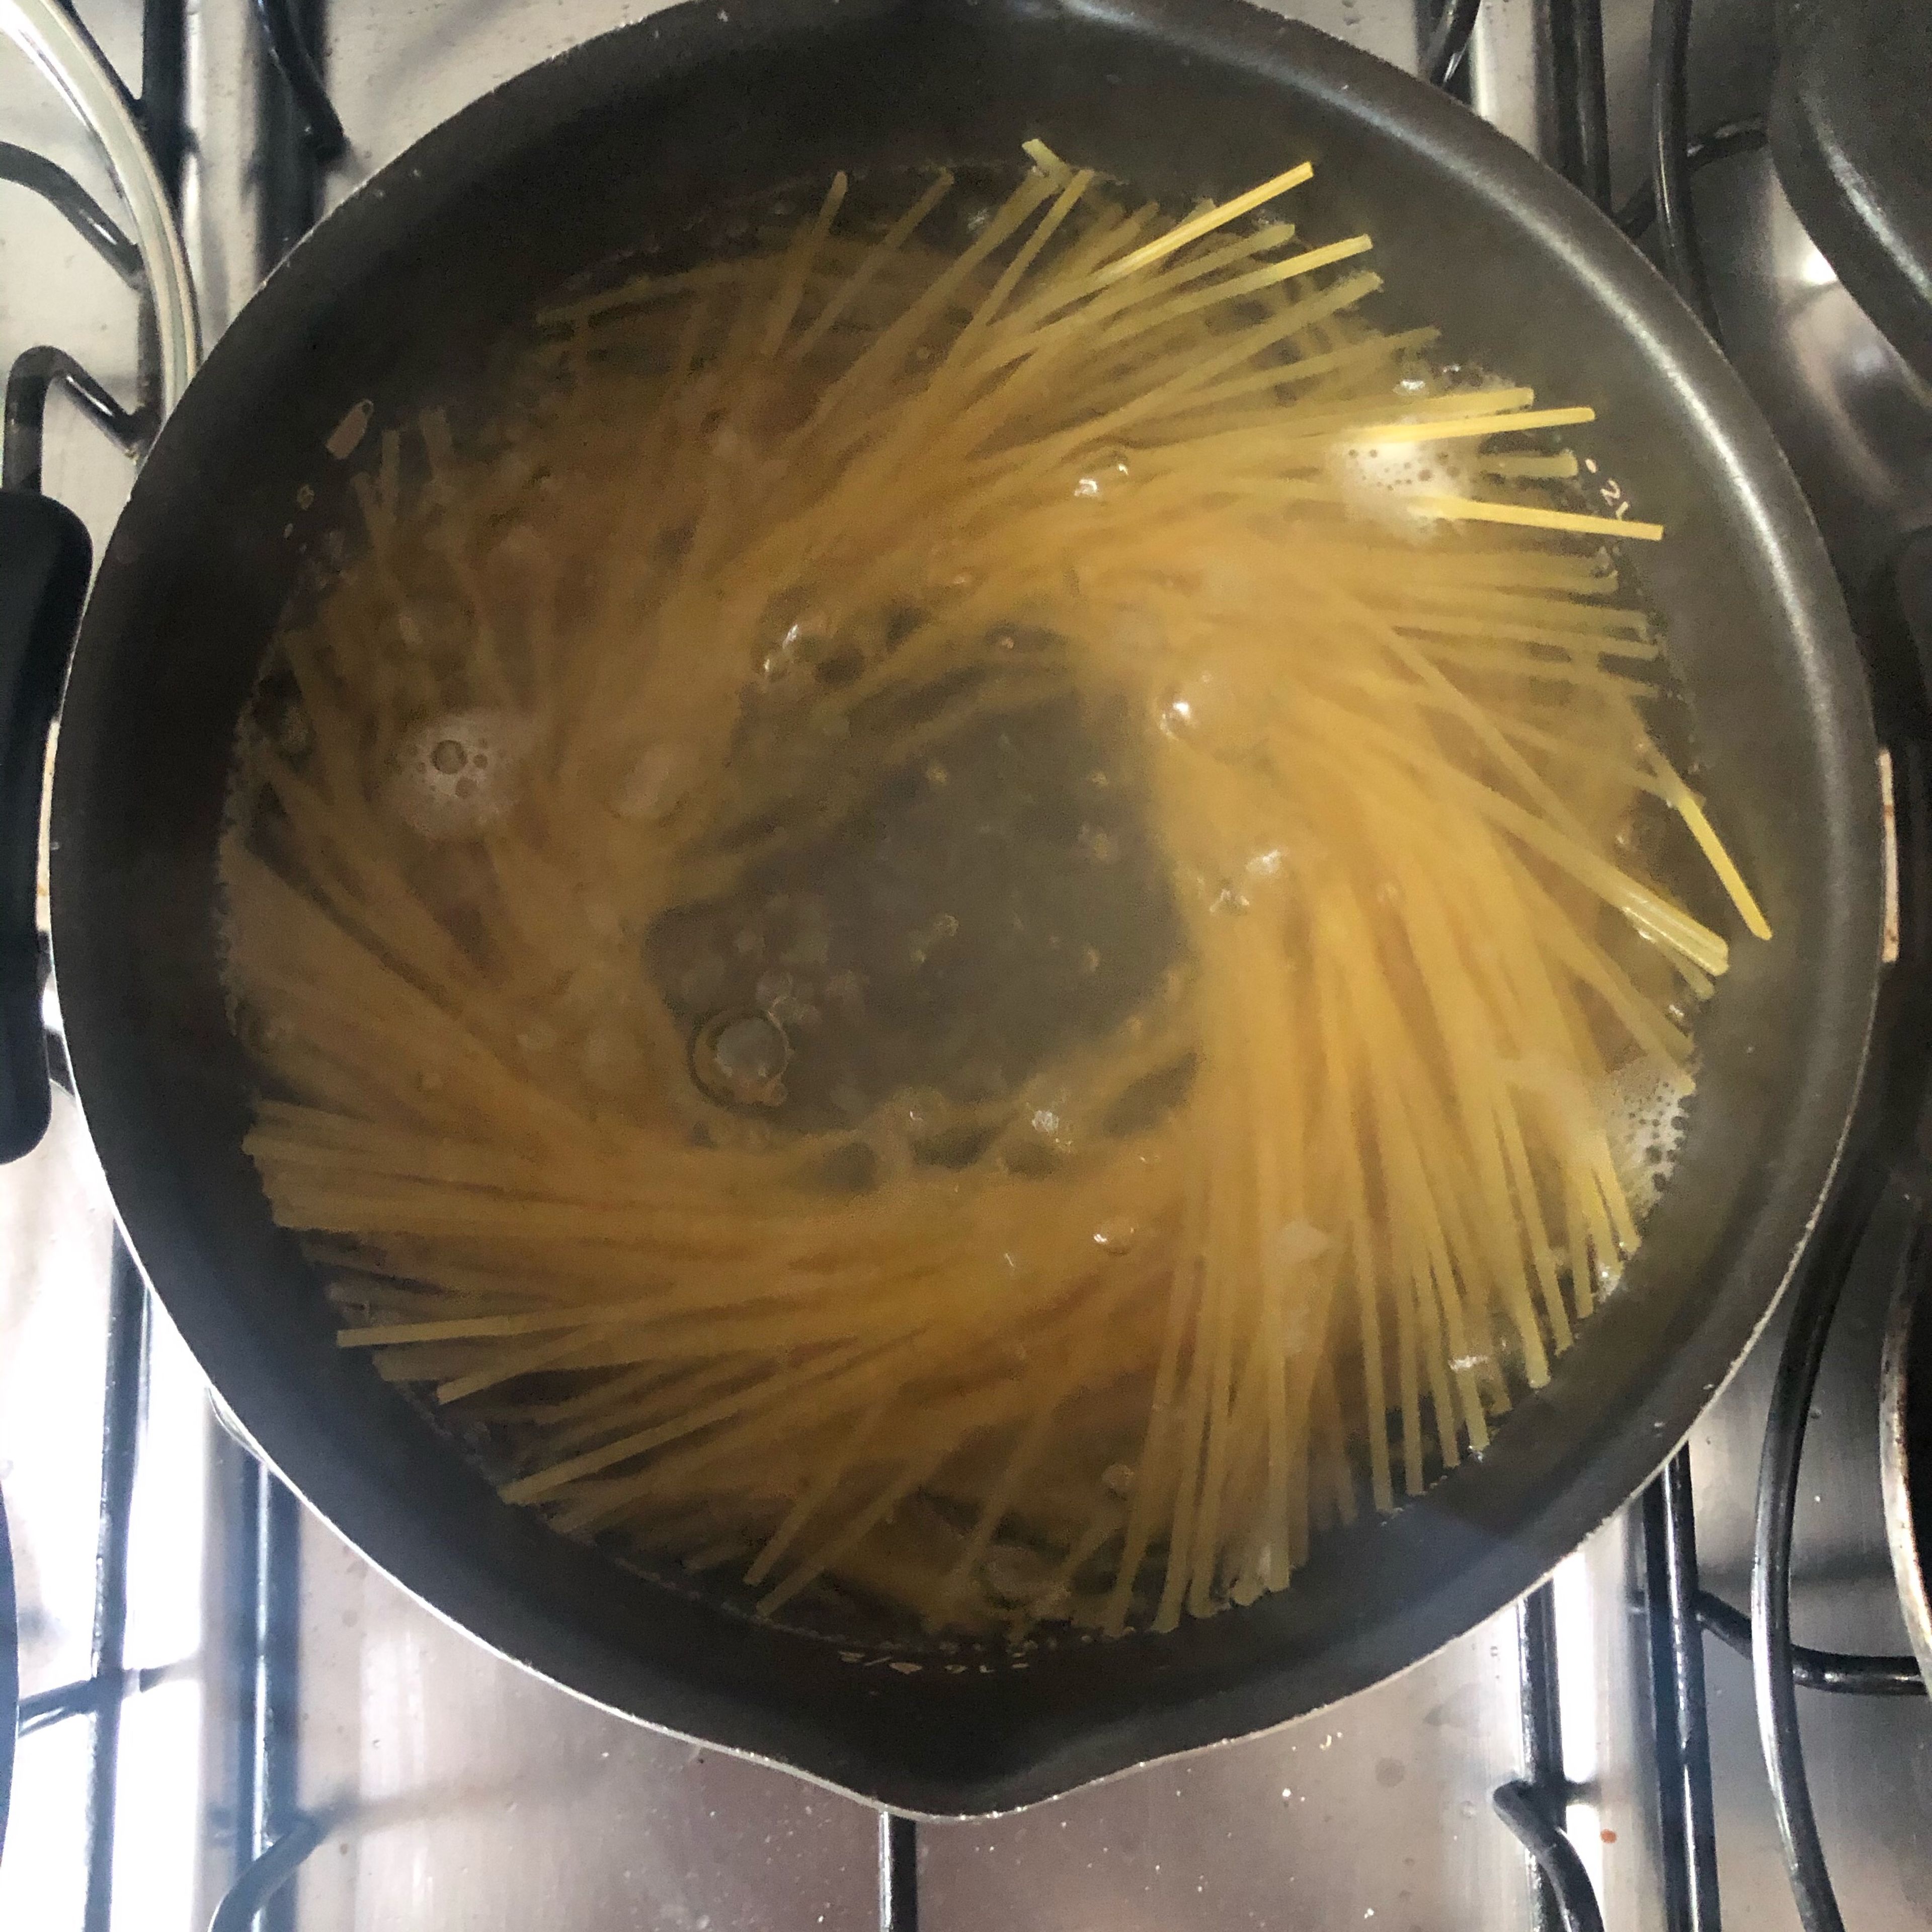 Start boiling the water to cook the pasta. Sprinkle a few amount of salt in the water and when it’s boiling star cooking the pasta. 